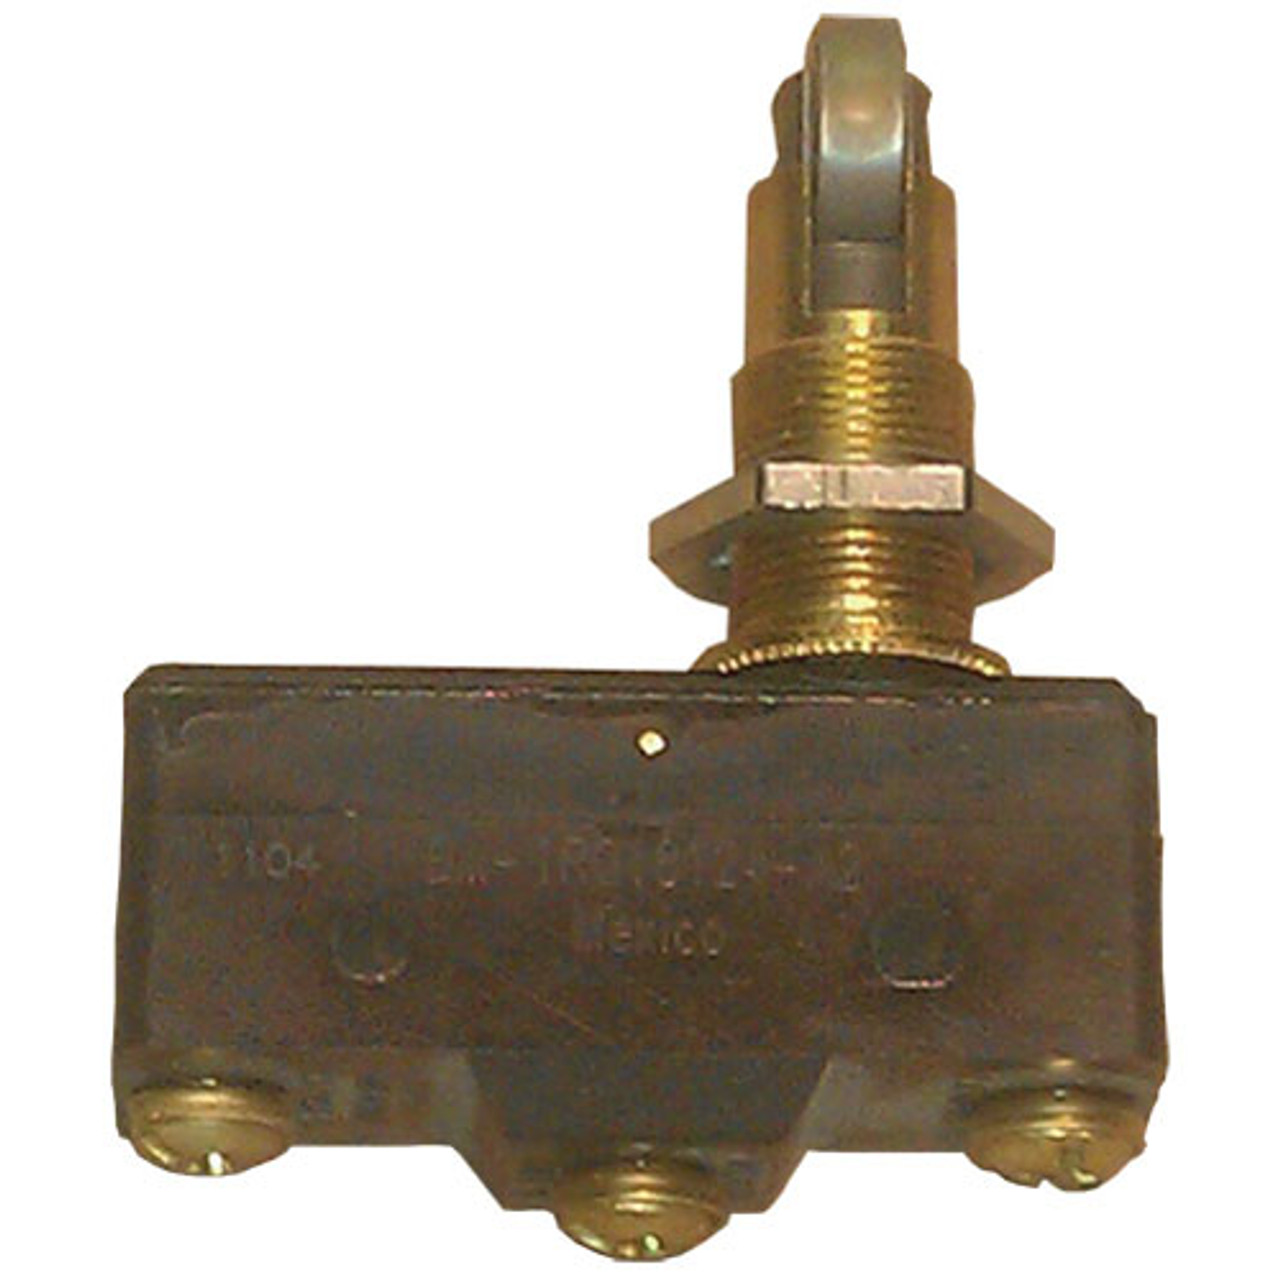 Interlock Switch - Replacement Part For Southern Pride 1005